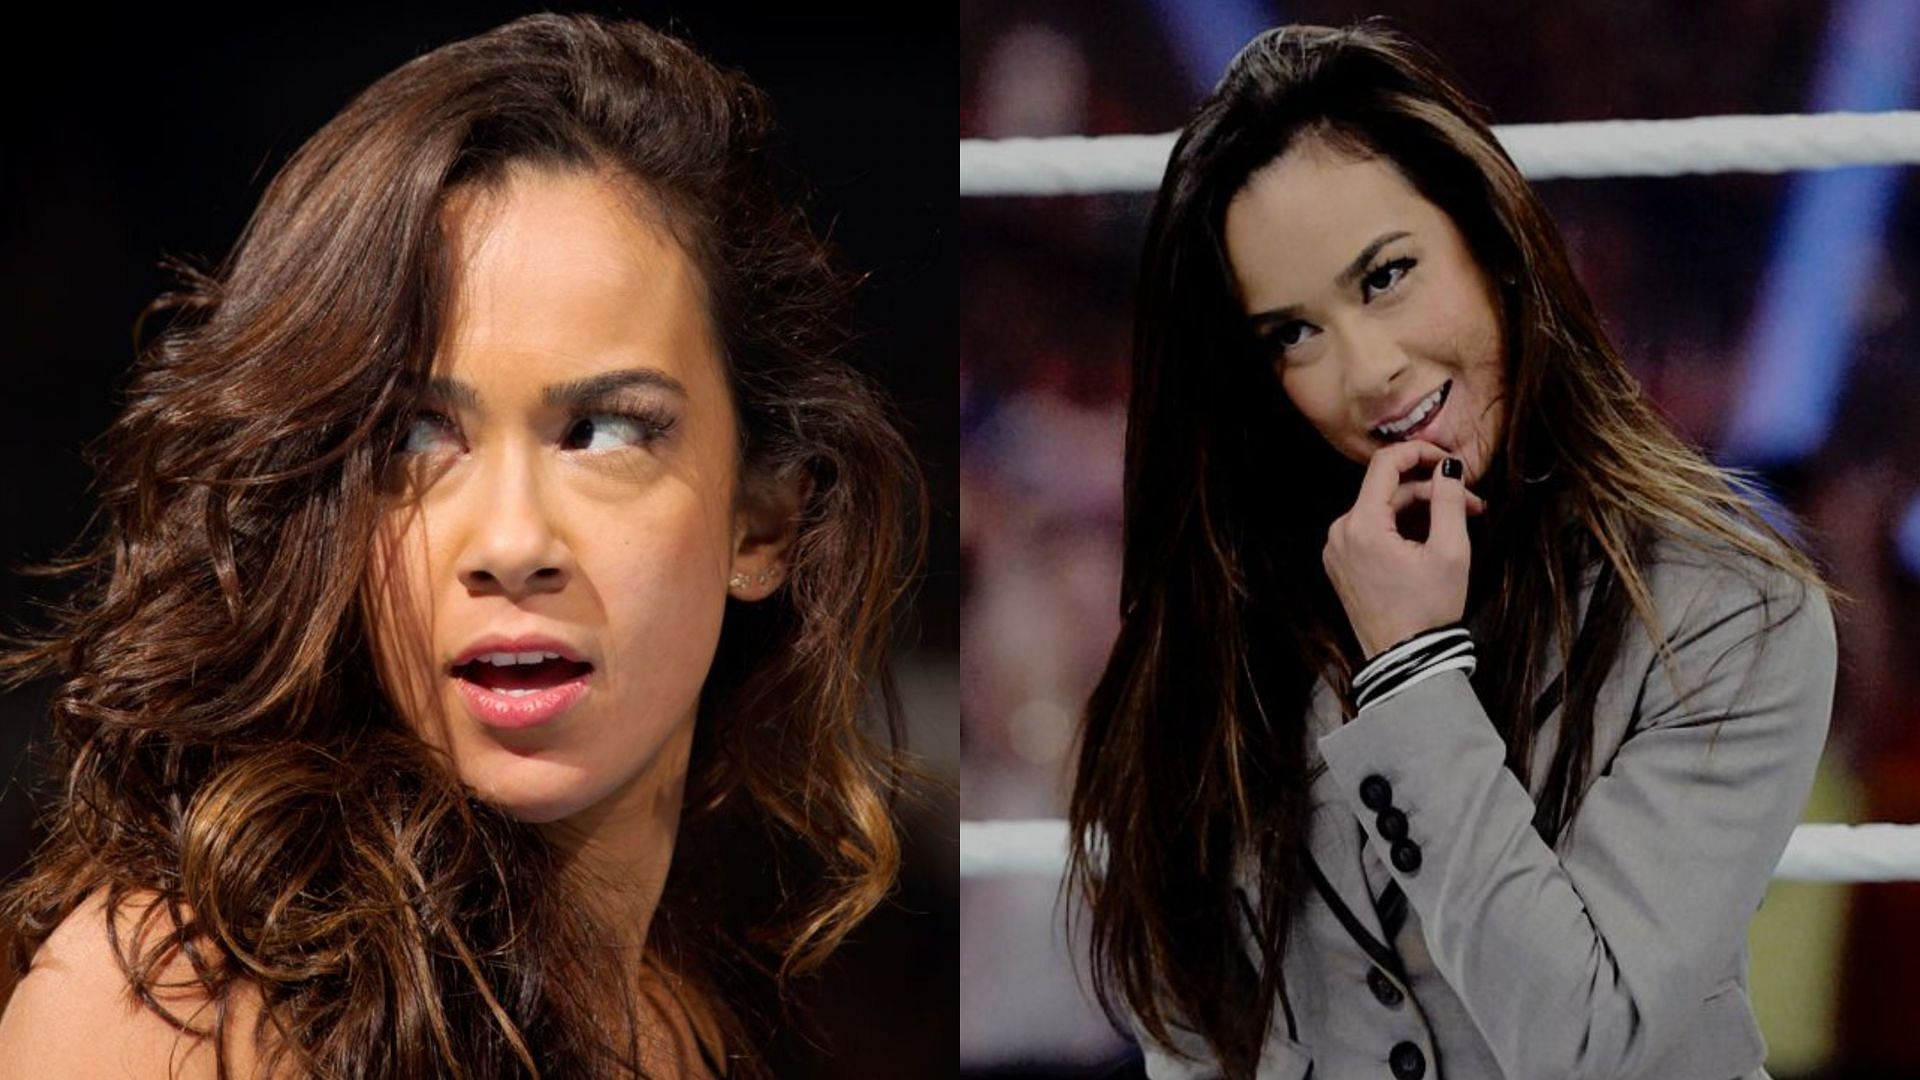 When former WWE star went off-script to 'make out' with AJ Lee on TV